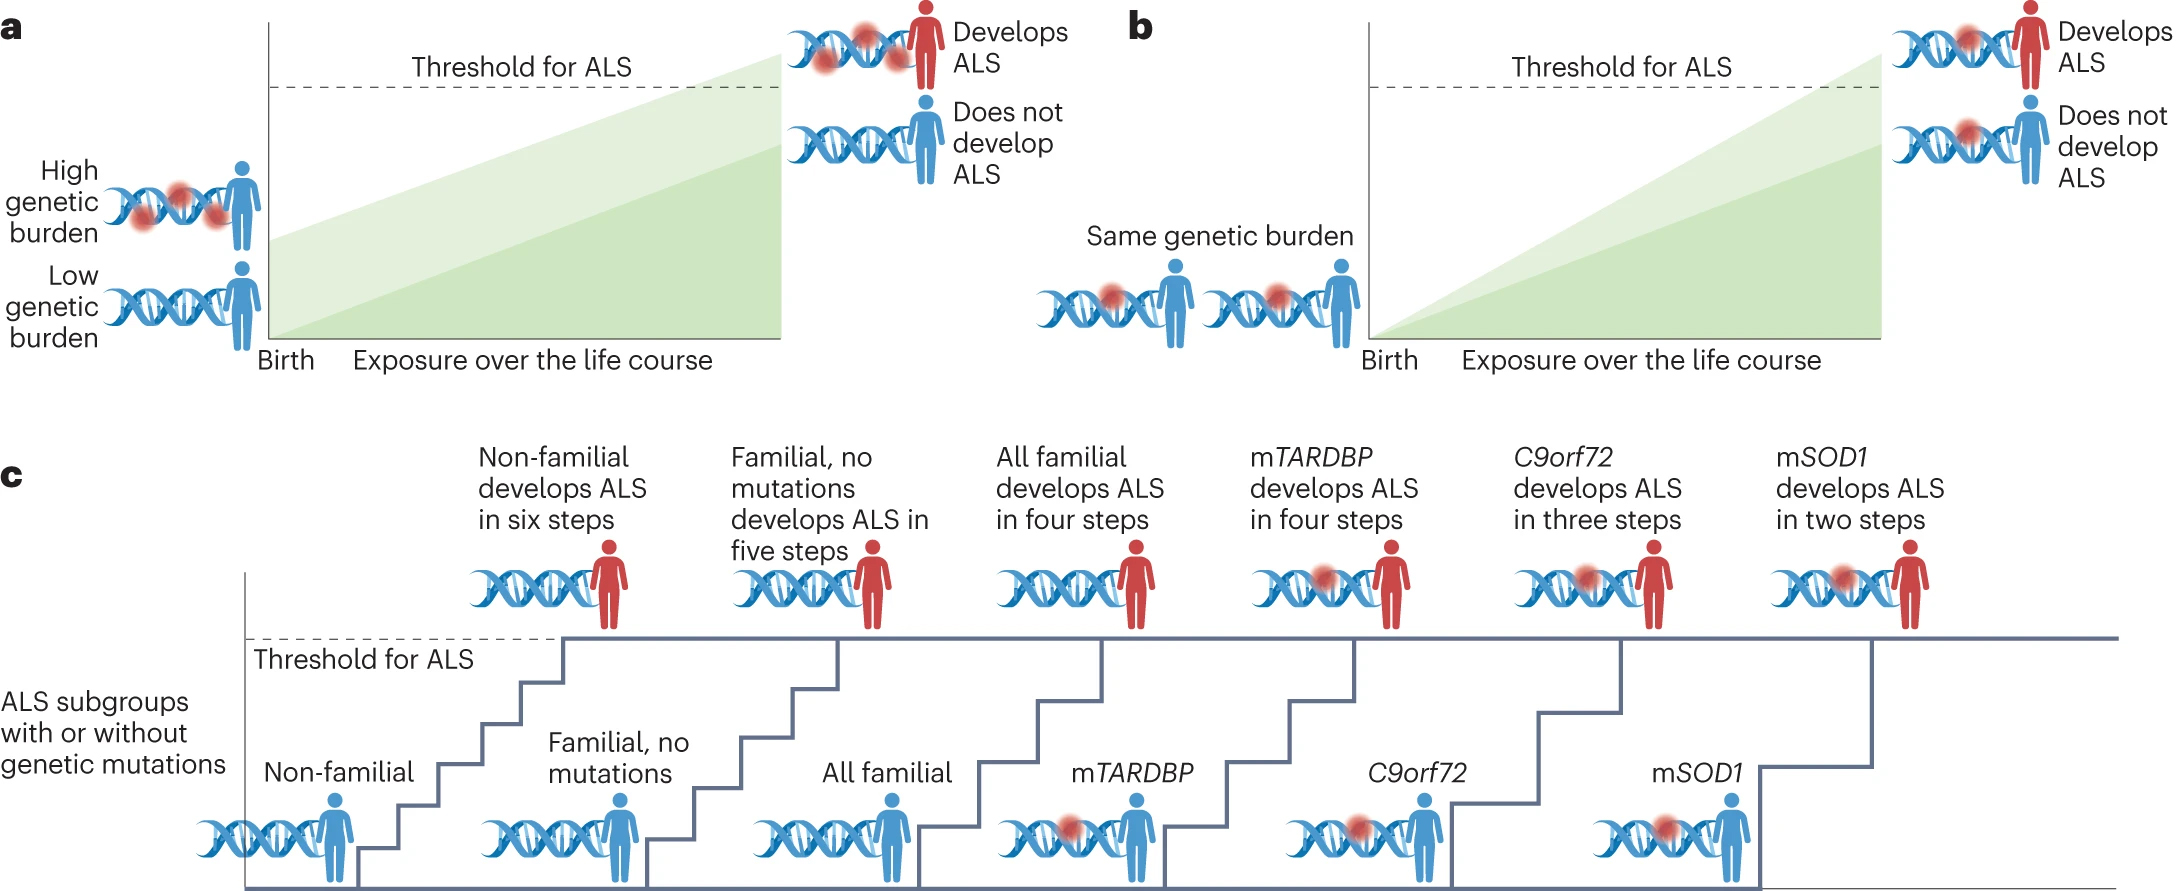 Figure 2 from Nature Reviews Neurology "The amyotrophic lateral sclerosis exposome: recent advances and future directions"